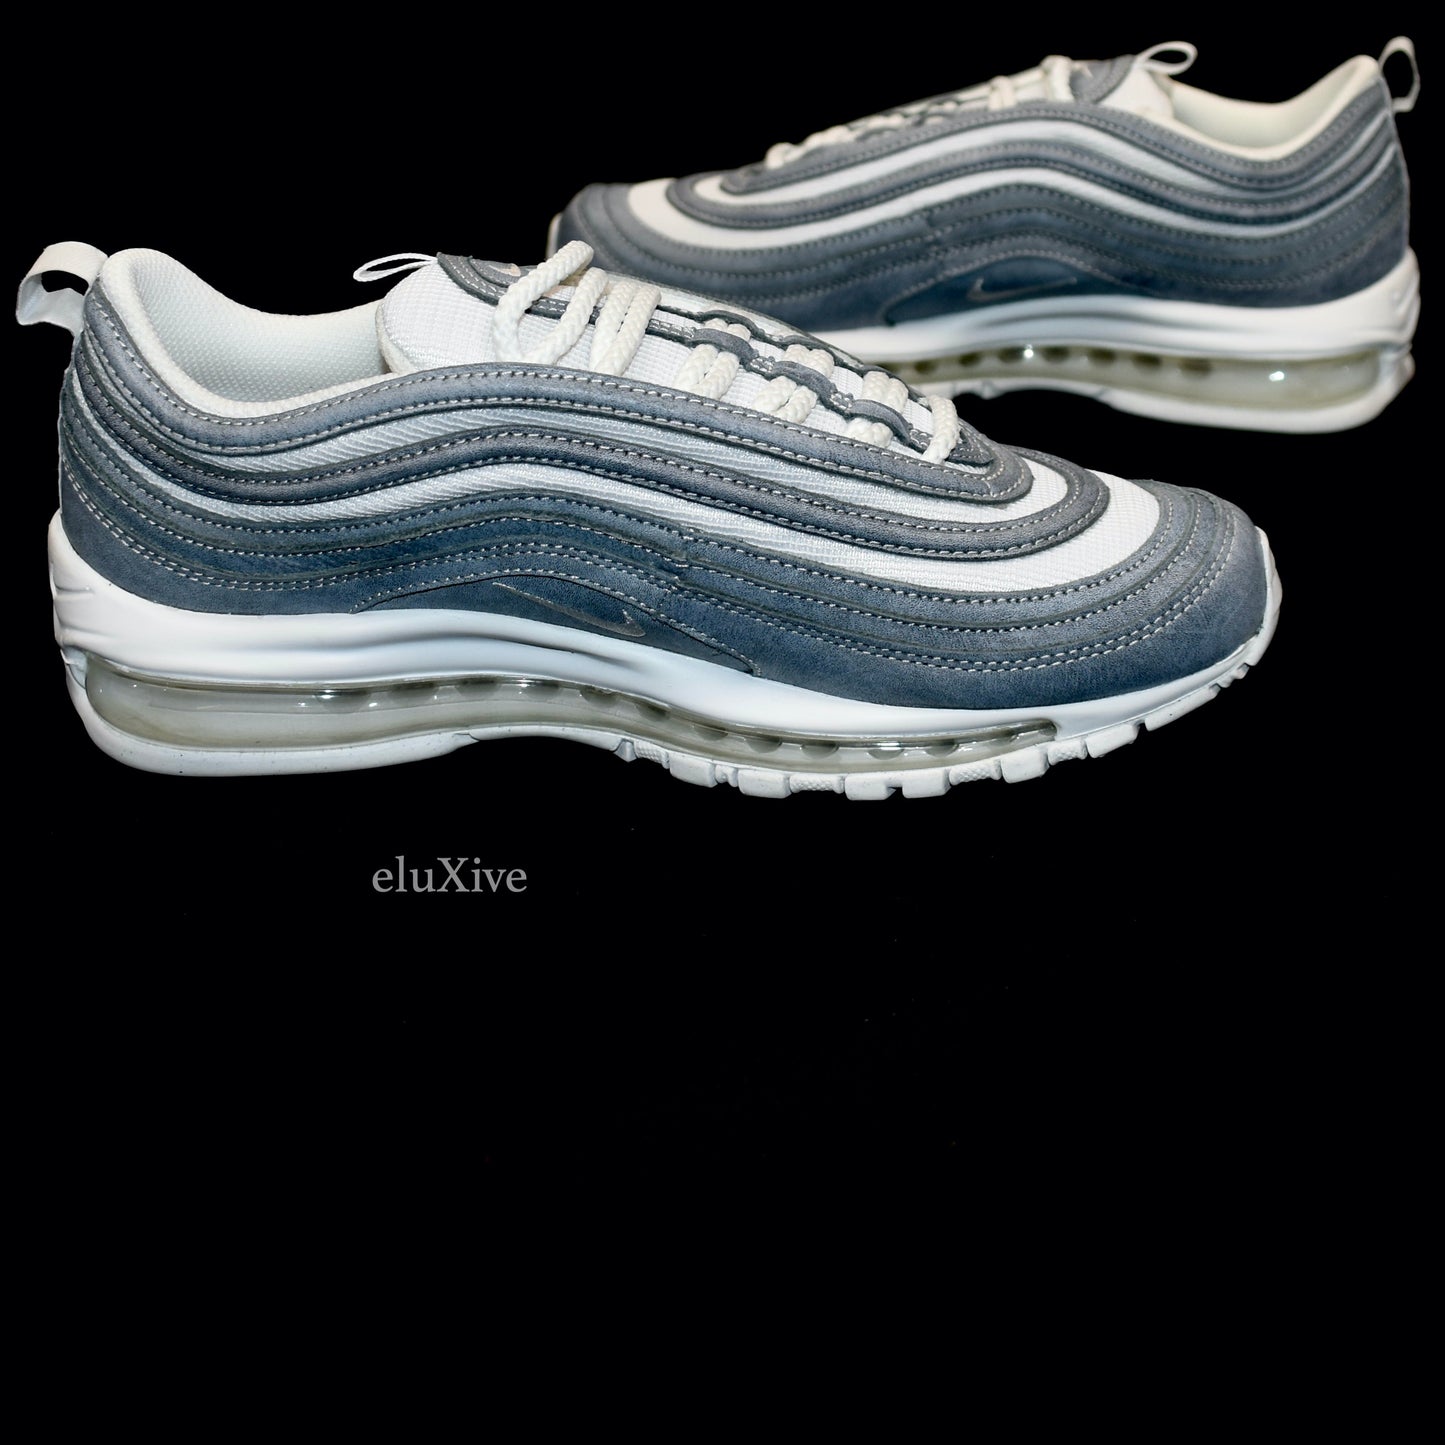 Comme des Garcons x Nike - Air Max 97 SP CDG (White/Gray)